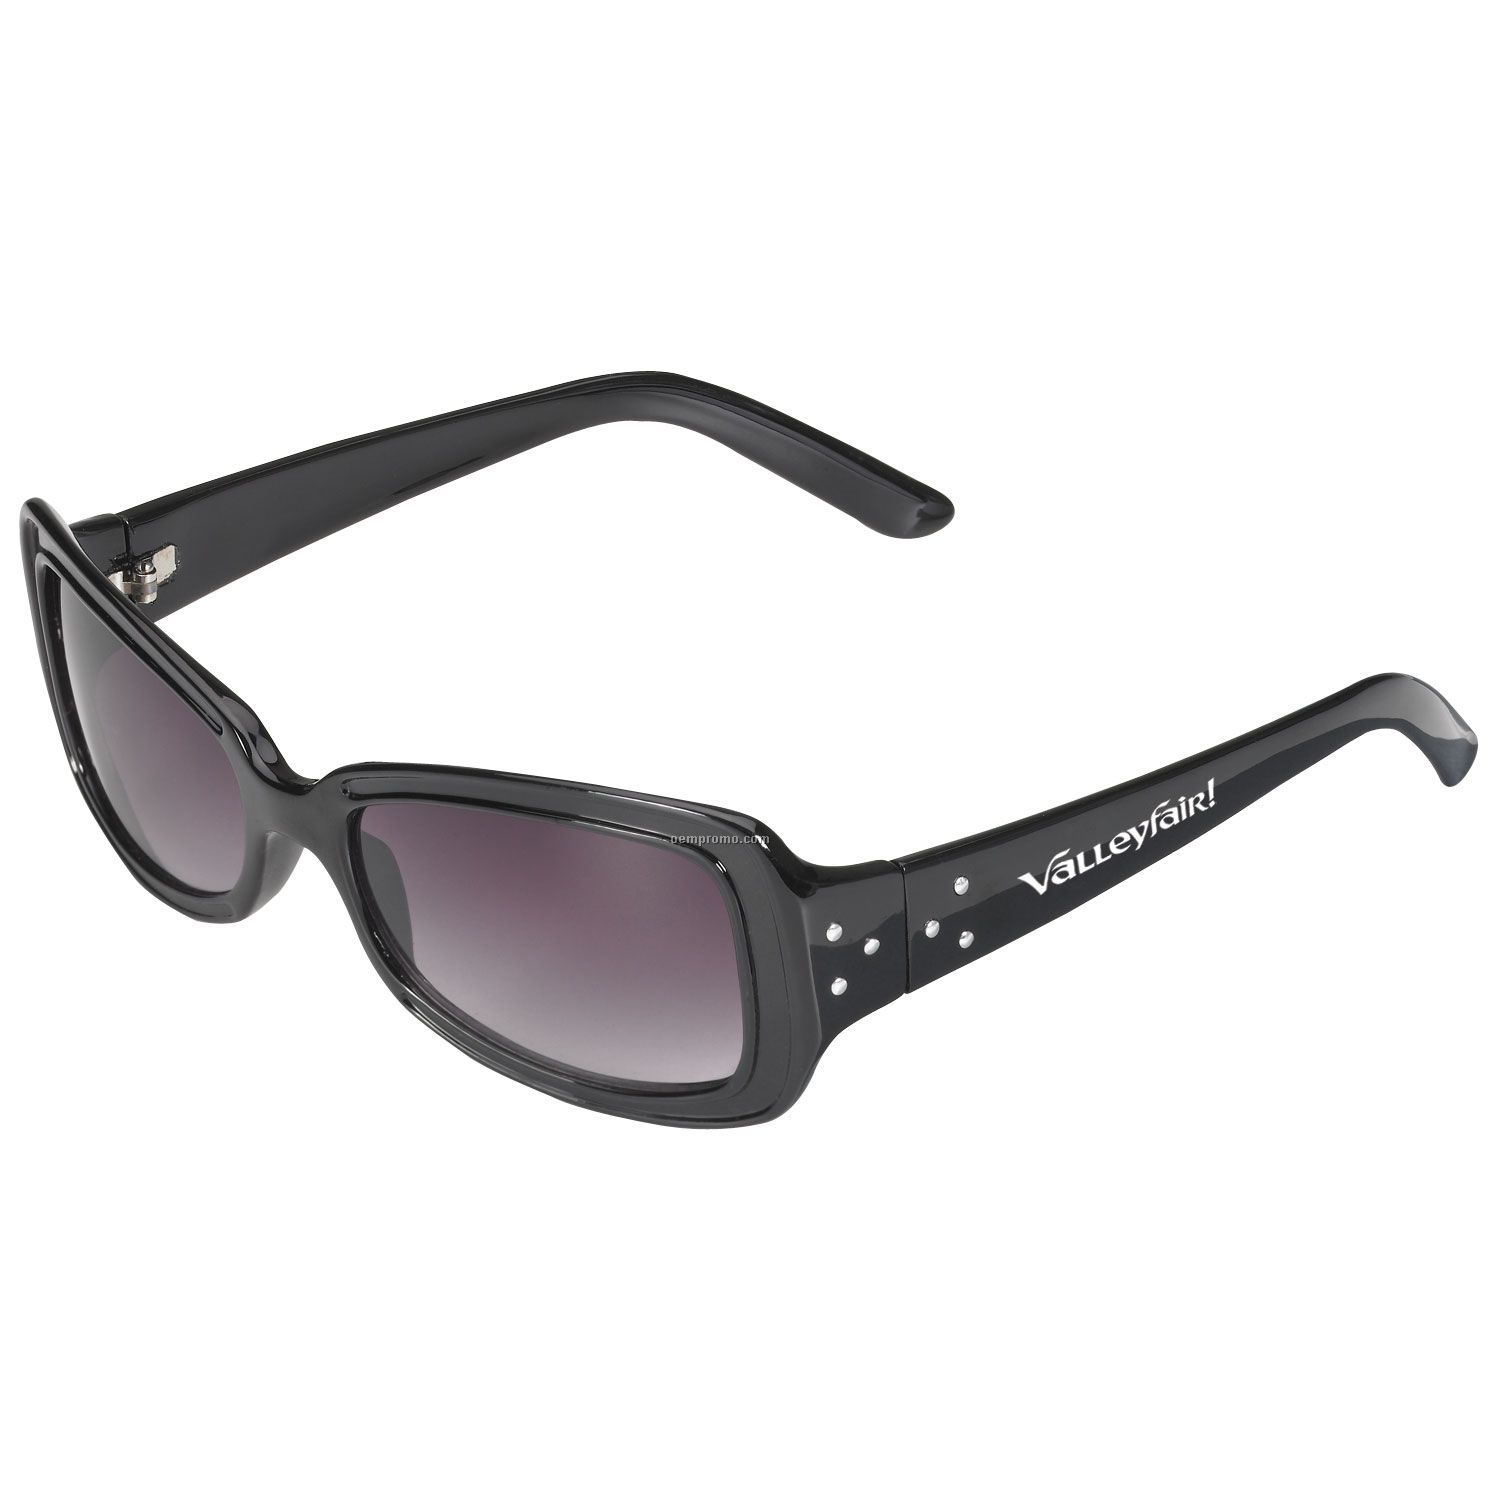 Glamour Sunglasses W/ Acetate Frame, Chrome Accents & Gray Lens